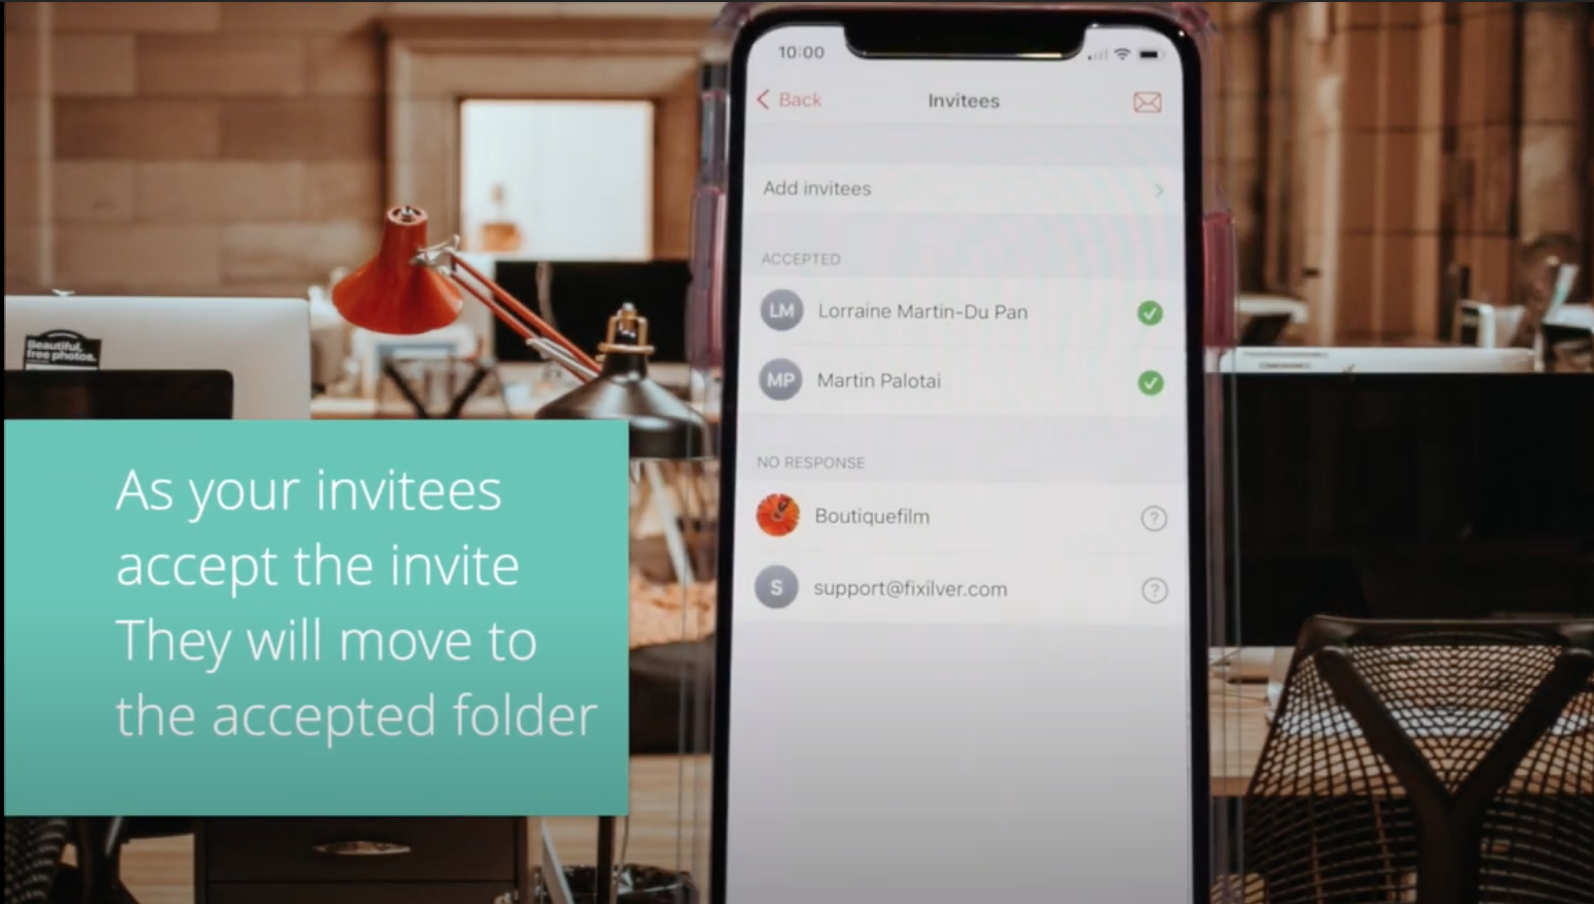 How to create an event and invite people (iPhone, iPad) 2020 | Declix